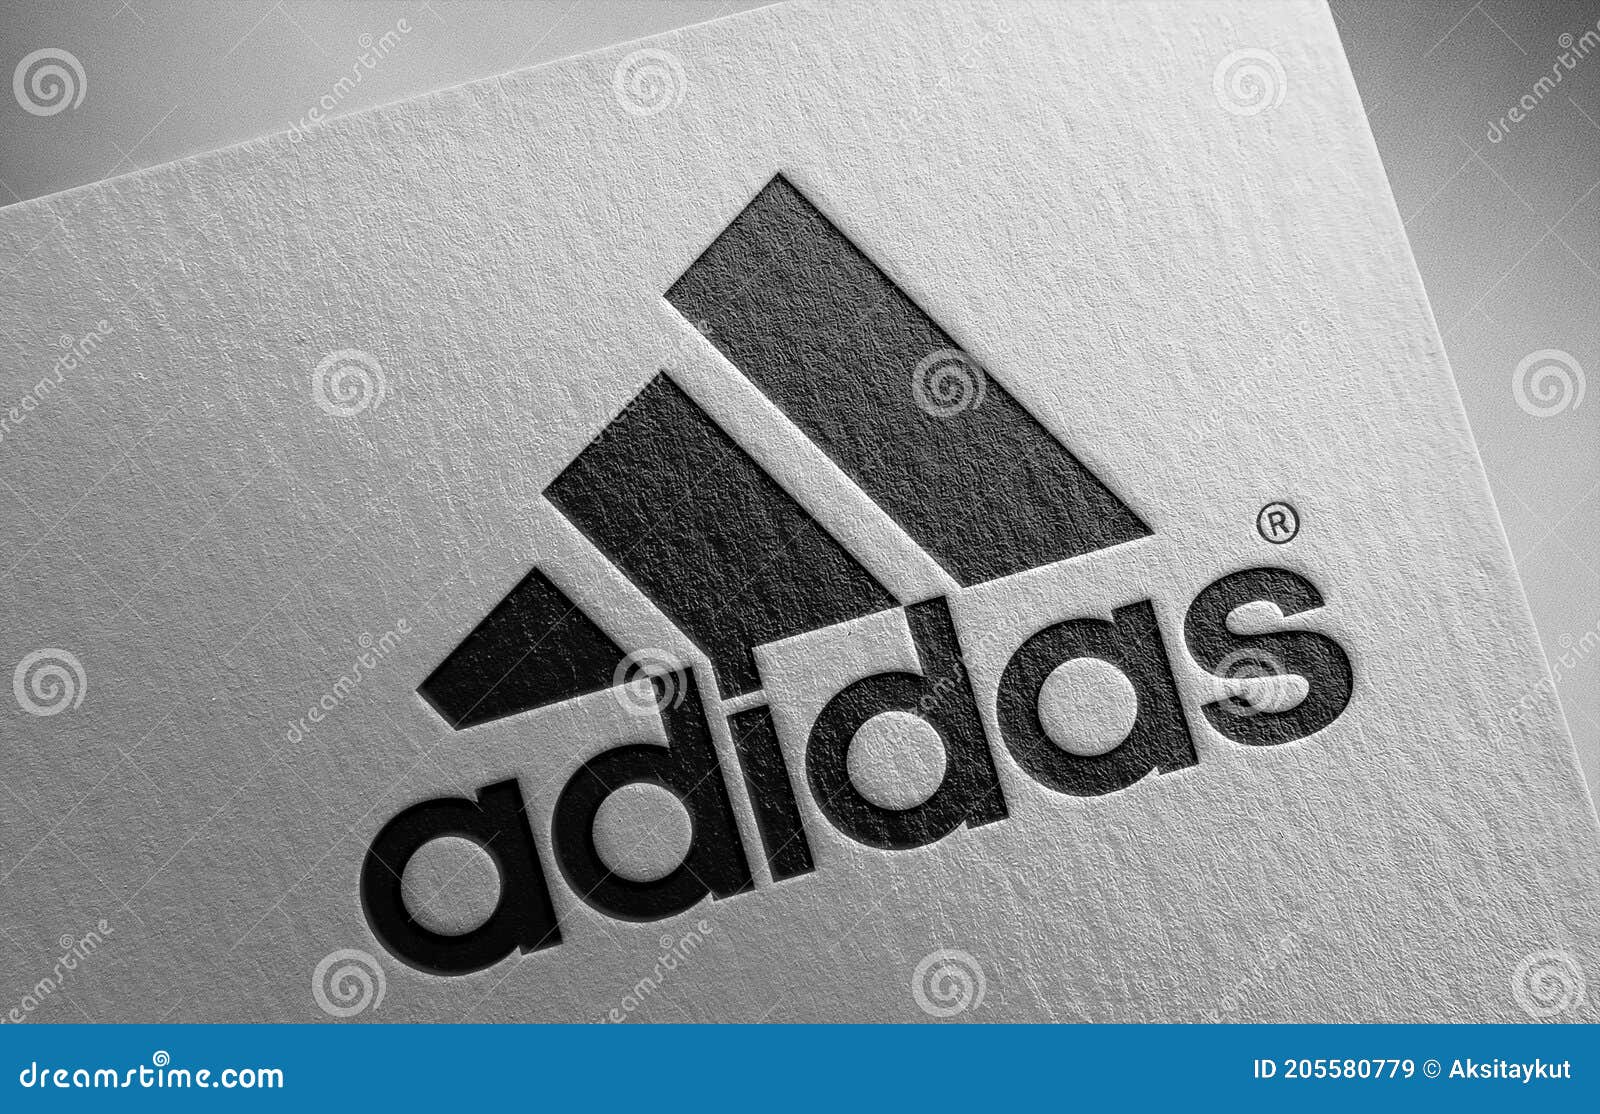 Adidas-9_1 Paper Texture Stock Image - Image of german, stylized: